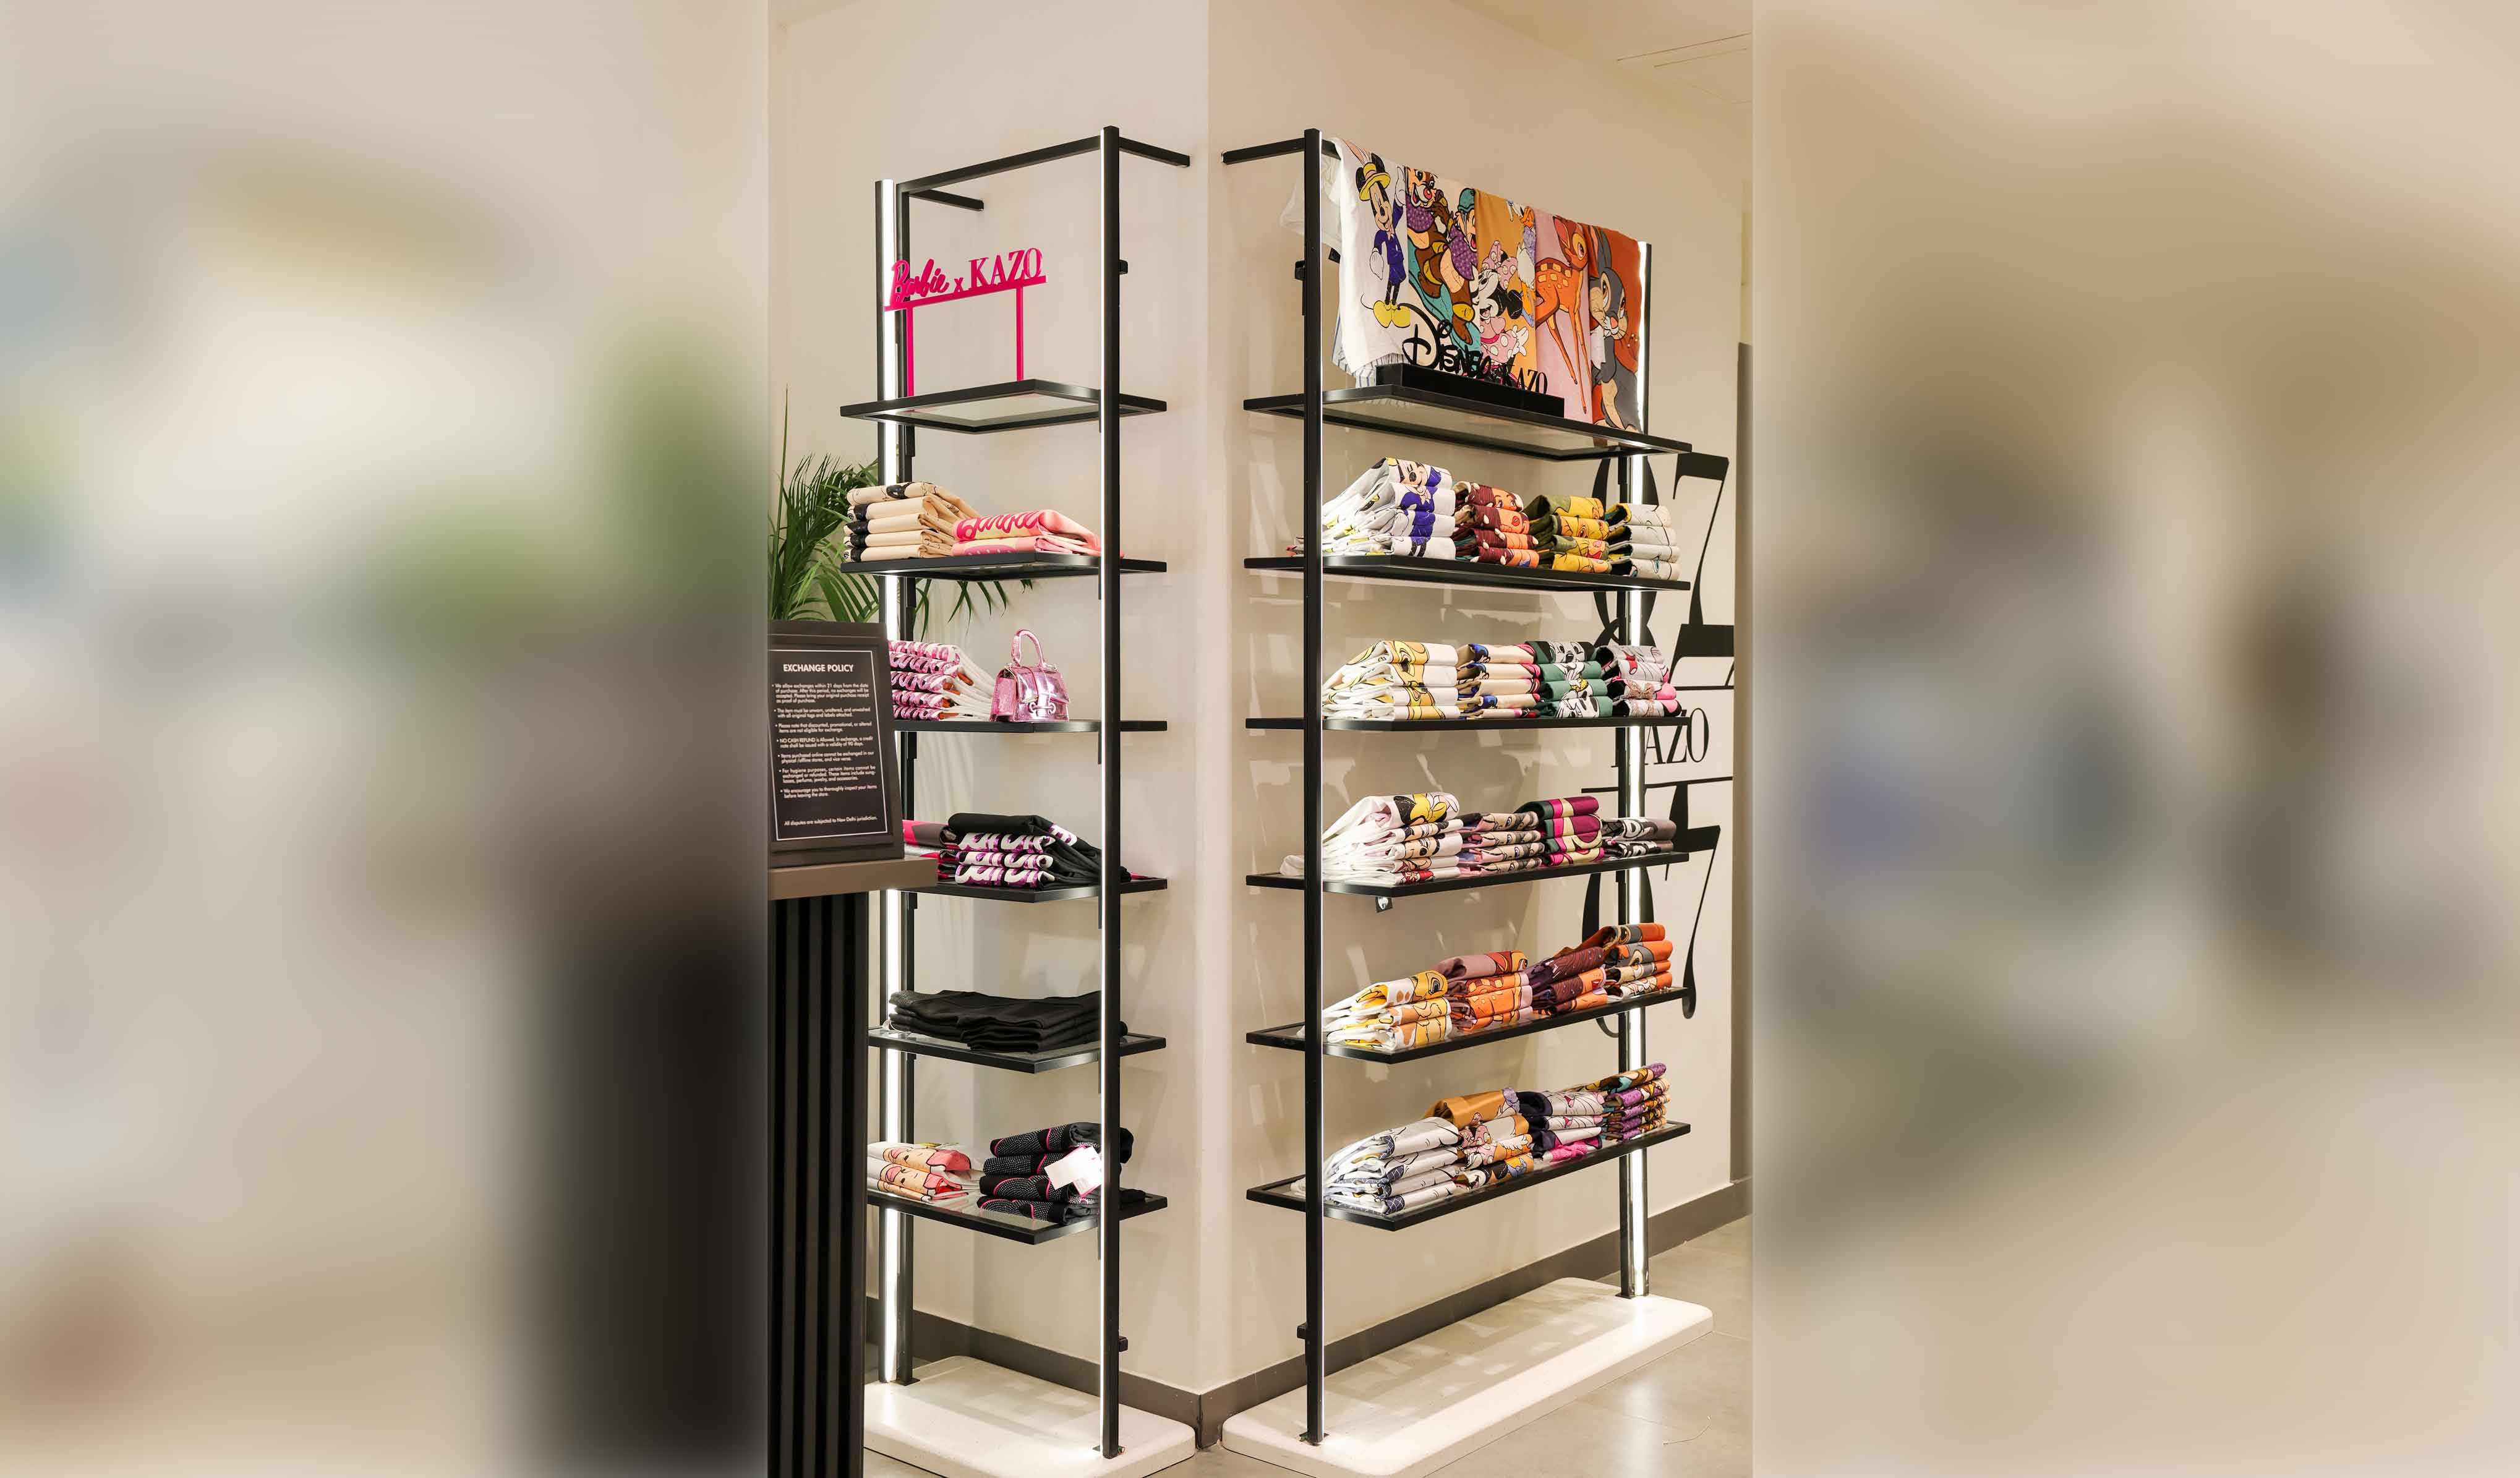 KAZO-Disney-and-KAZO-Barbie-Collection-showcased-at-Newly-Opened-KAZO-Store-at-DLF-Mall-of-India,-Noida